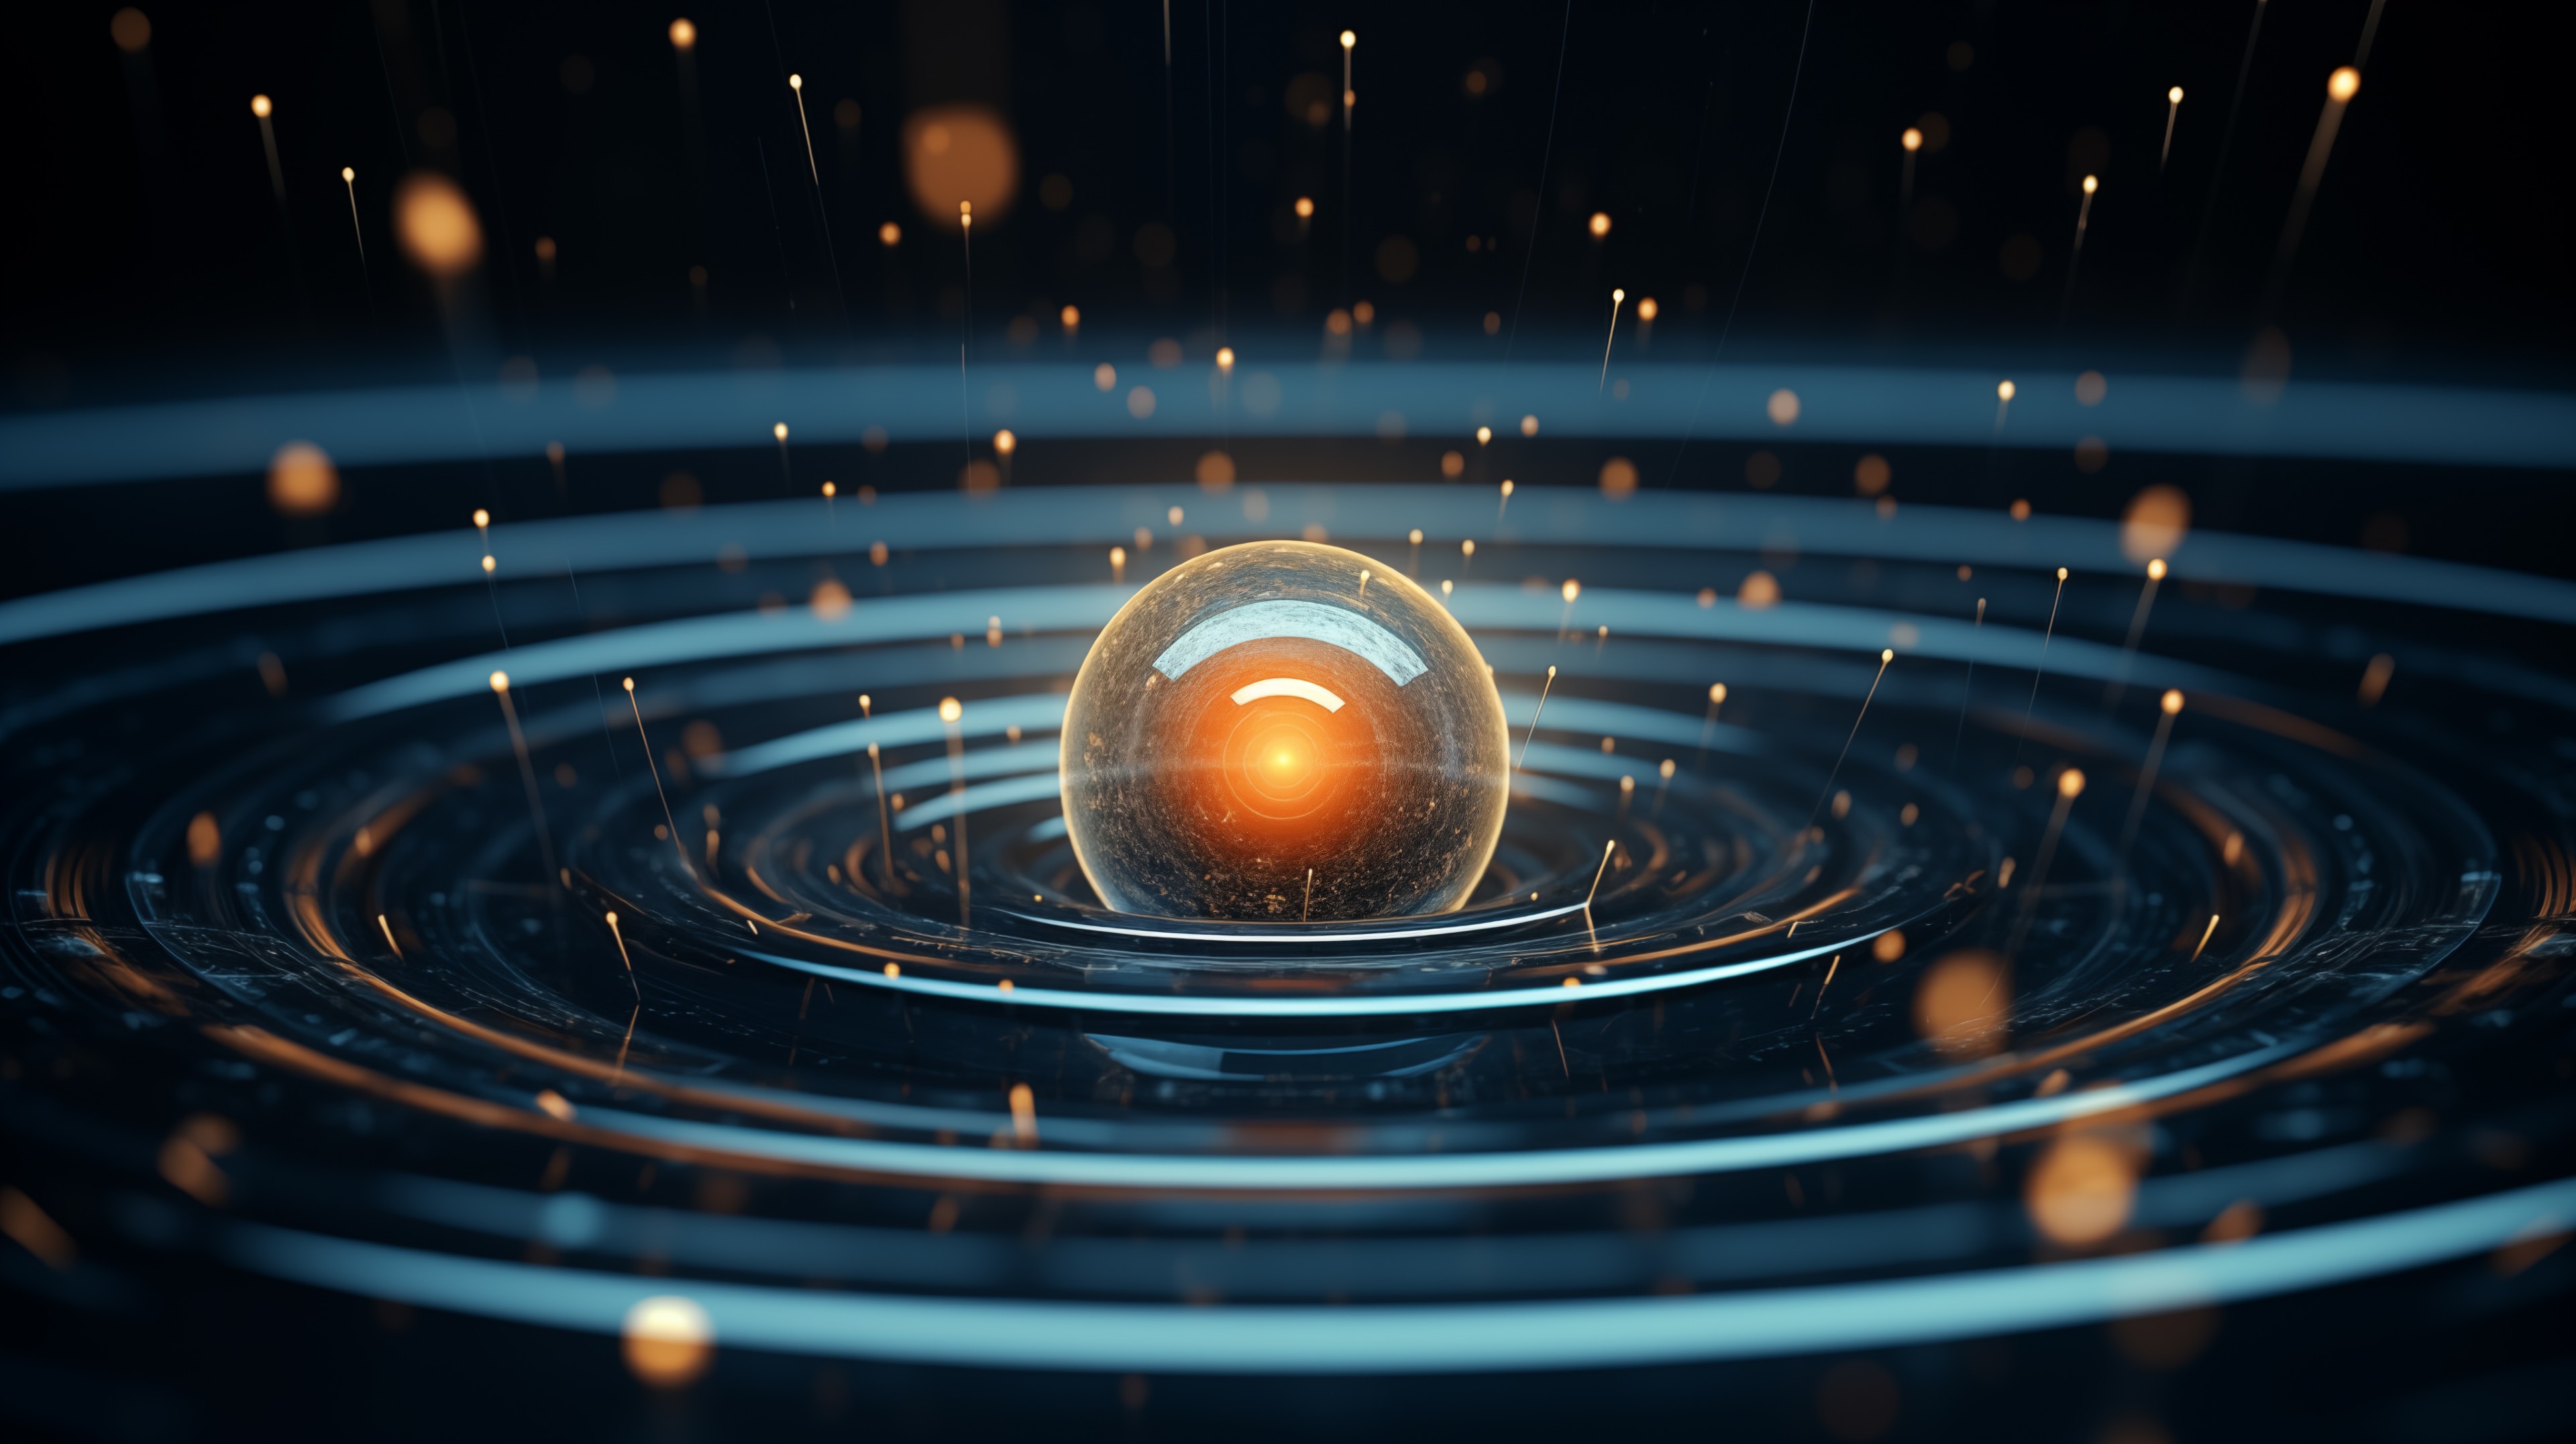 A futuristic digital sphere glowing orange at the center, surrounded by concentric blue light rings and floating golden particles on a dark background.